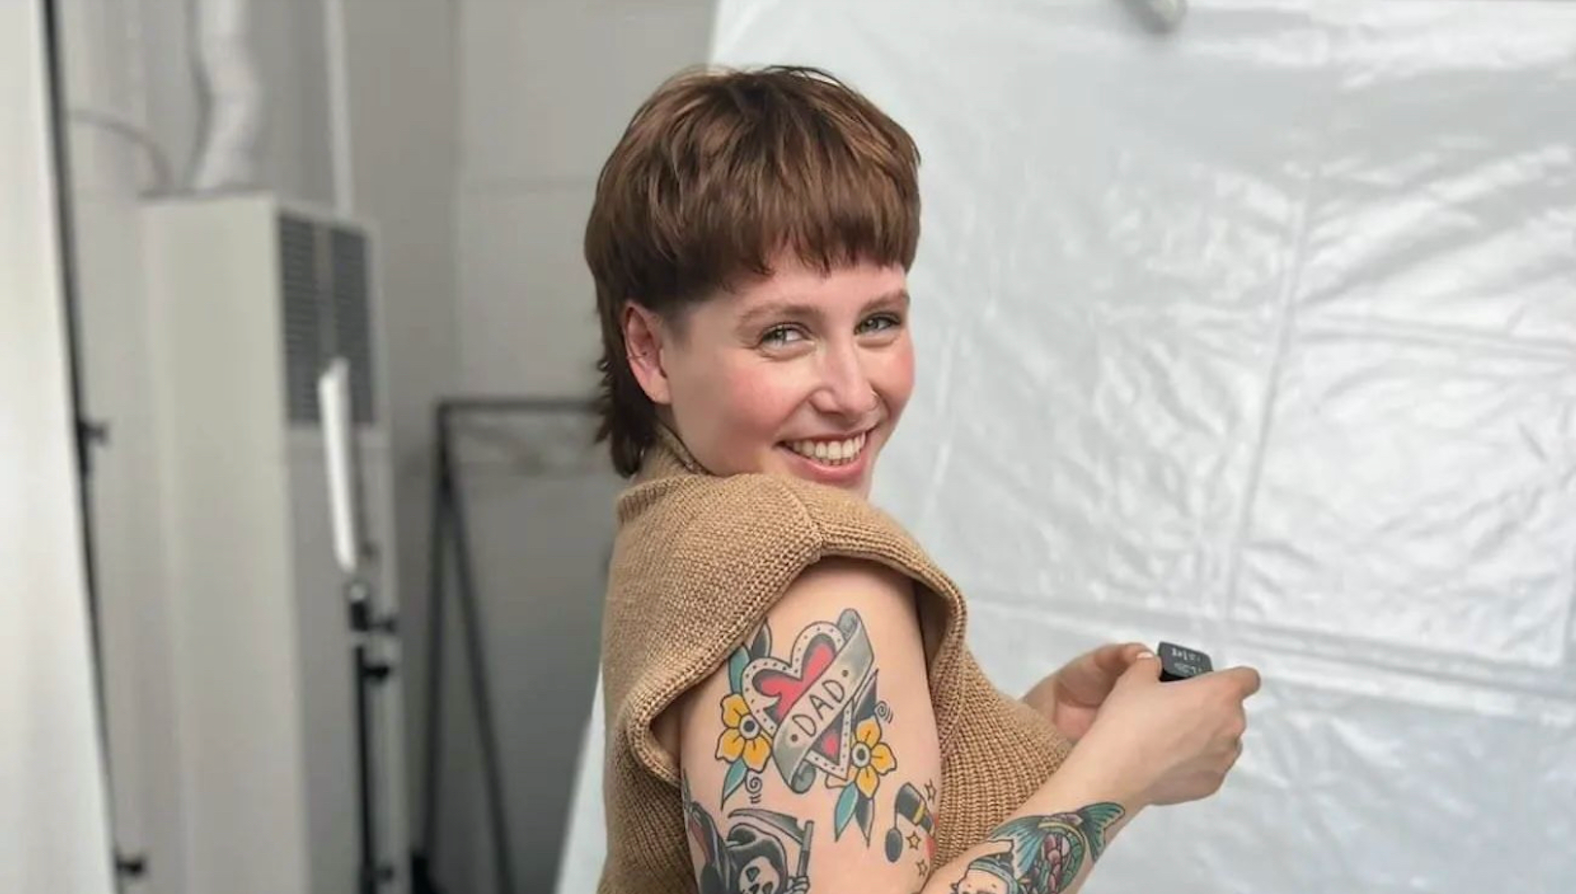 Getting ready backstage with Queer Comedian, support worker and dog mom Olivia!